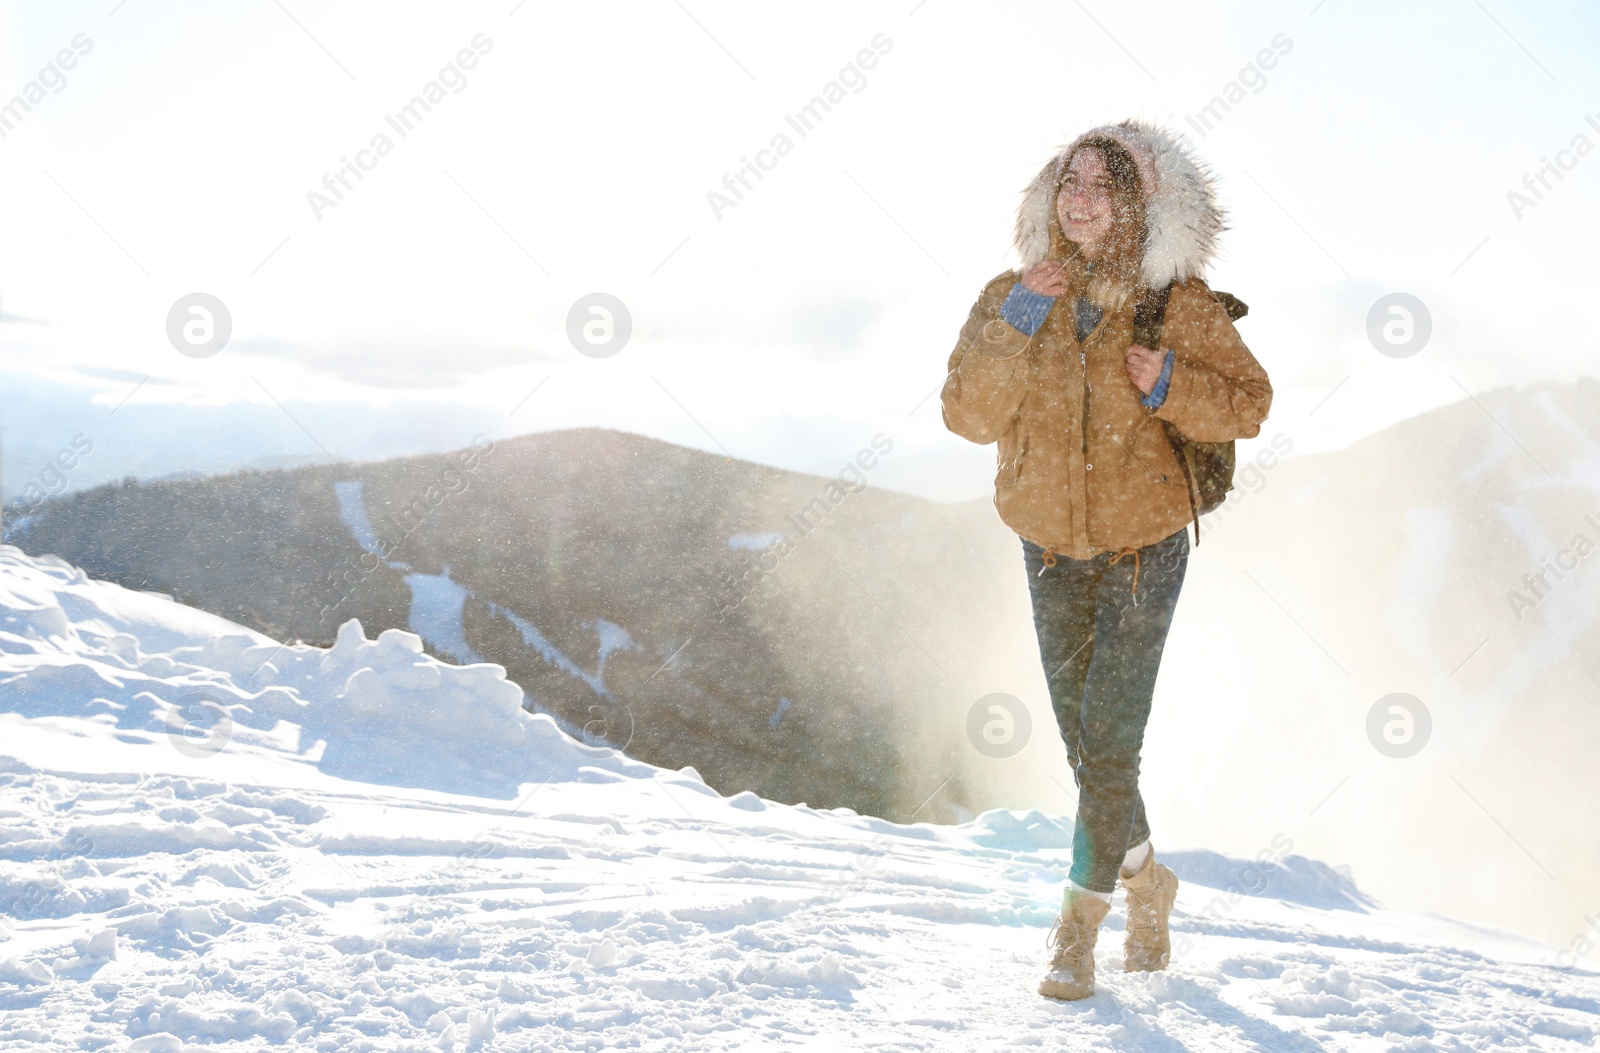 Photo of Happy young woman with backpack spending winter vacation in mountains. Space for text